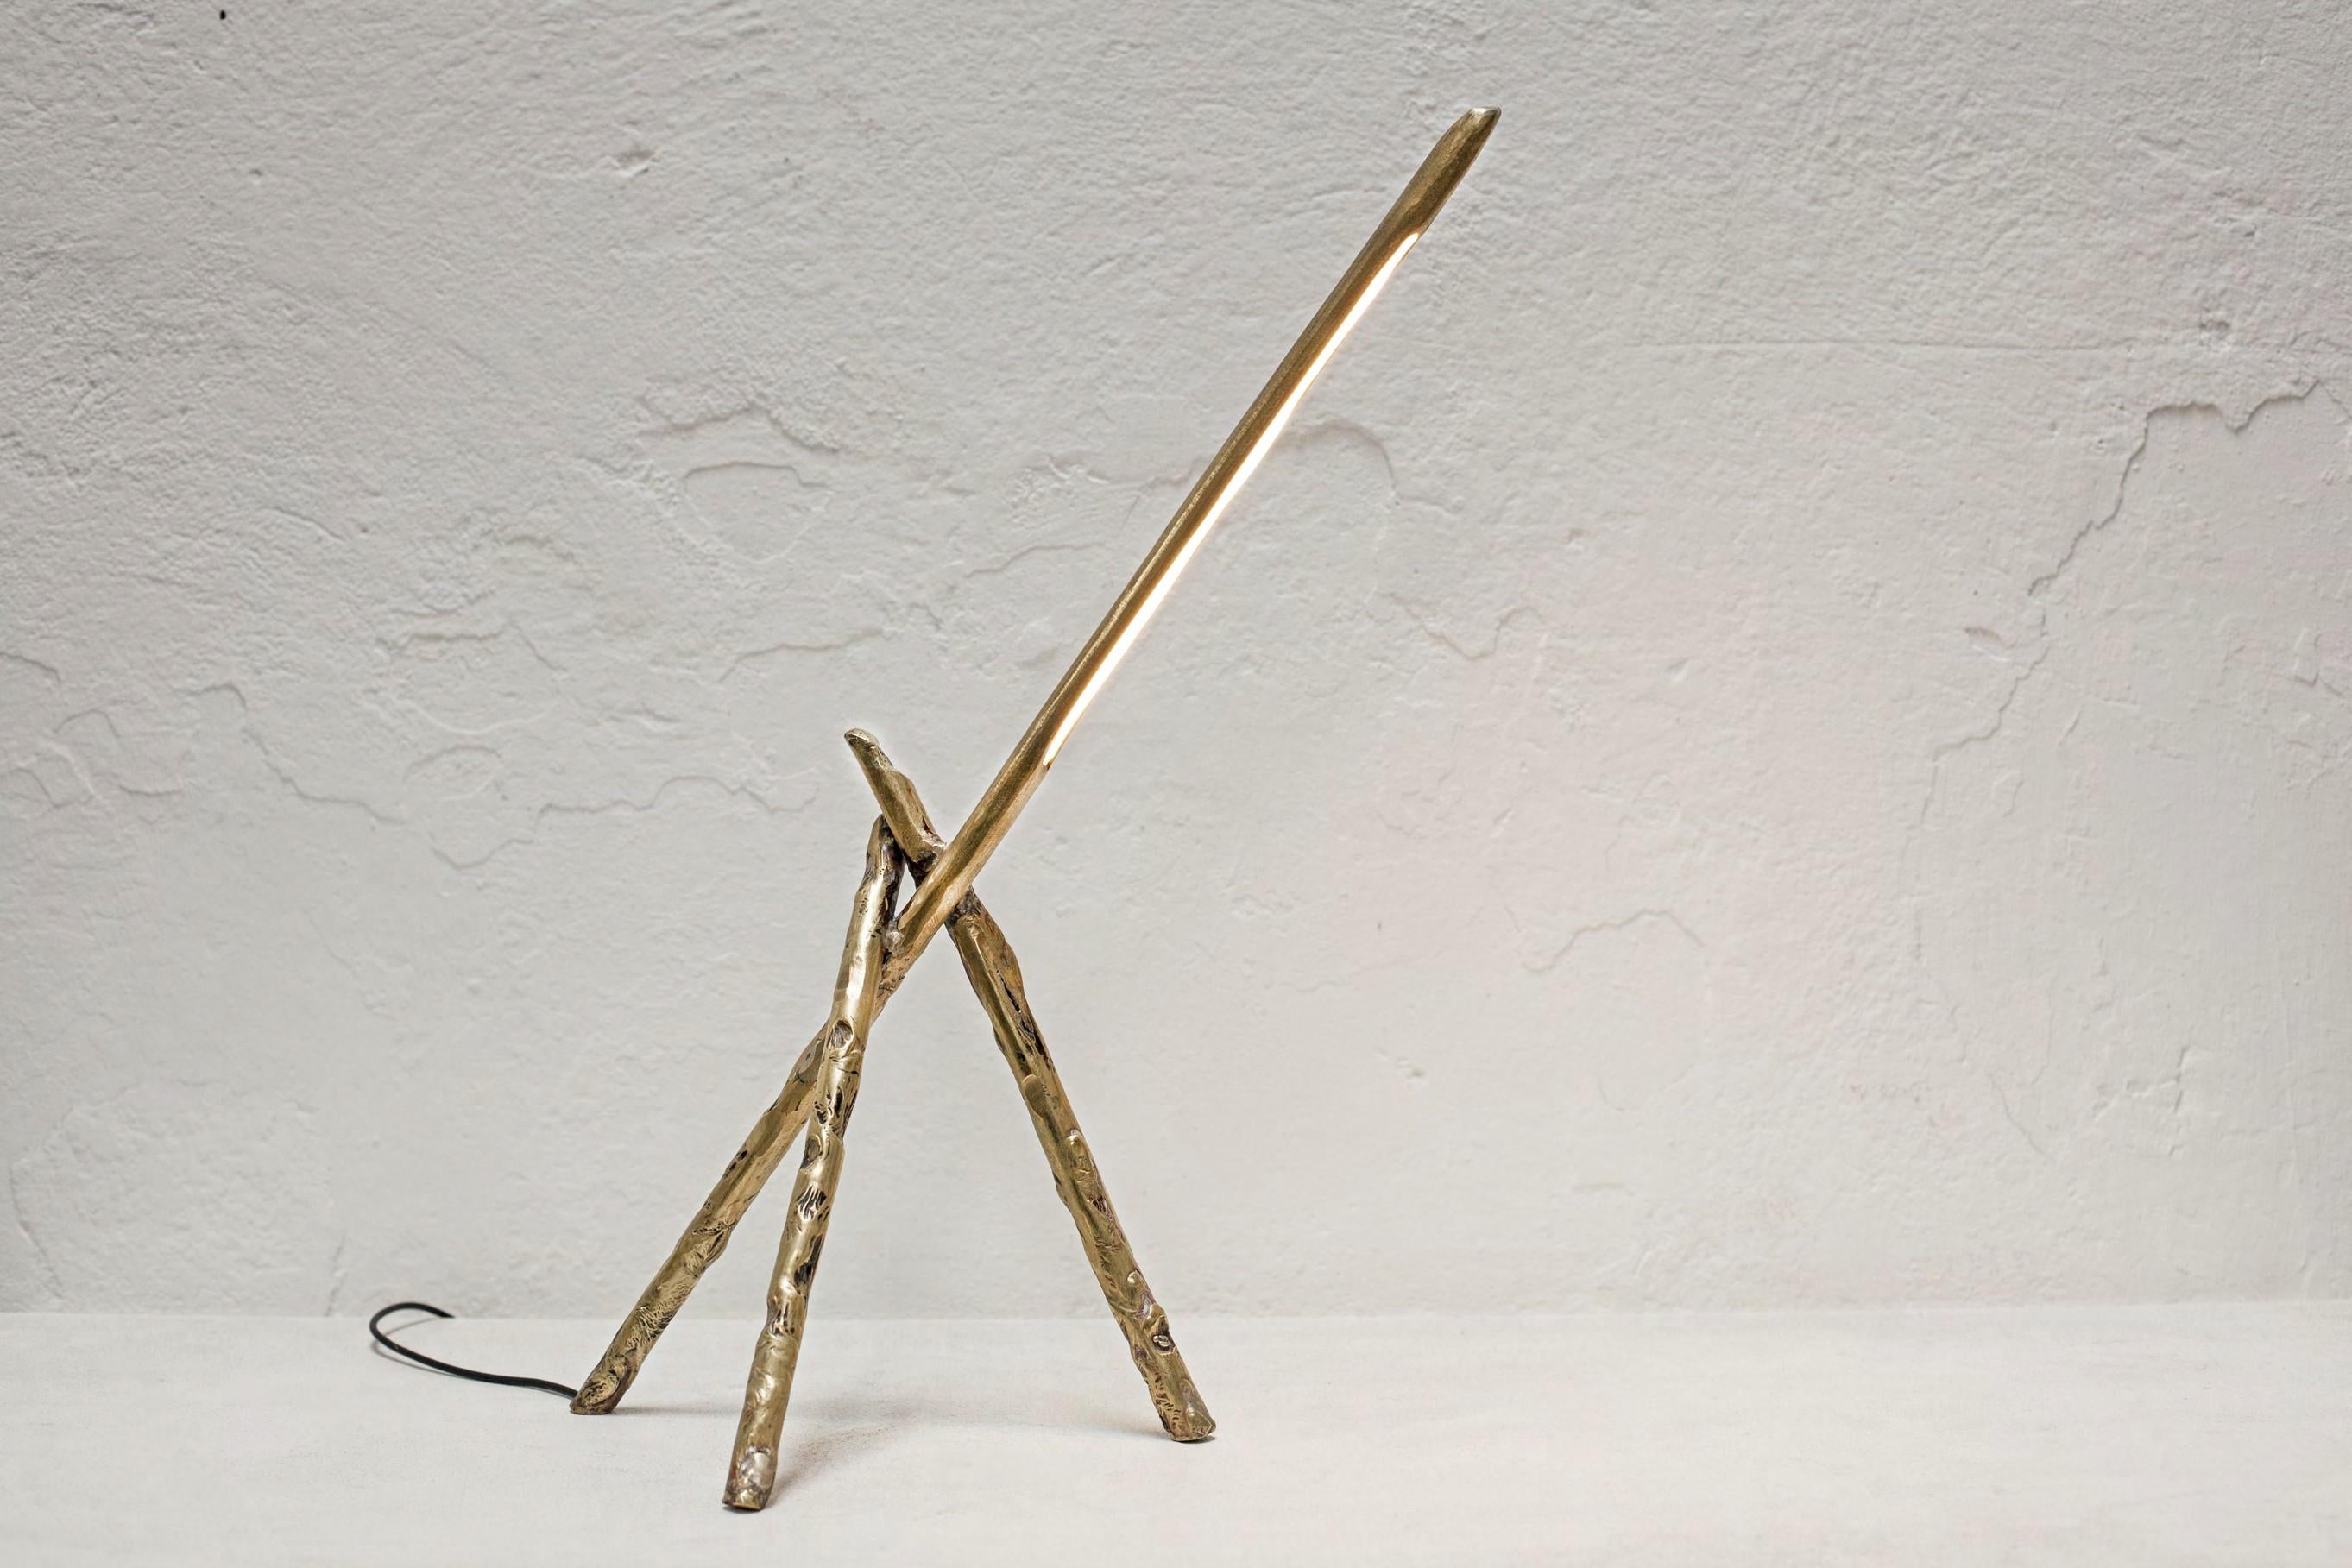 Prometeo brass table lamp by Morghen Studio
Dimensions: 25 x 25 x H 40 
Materials: Brass
Dimensions are customizable.

Morghen is a multidisciplinary studio that works on the boundaries between design, art and craftsmanship. They rely on techniques